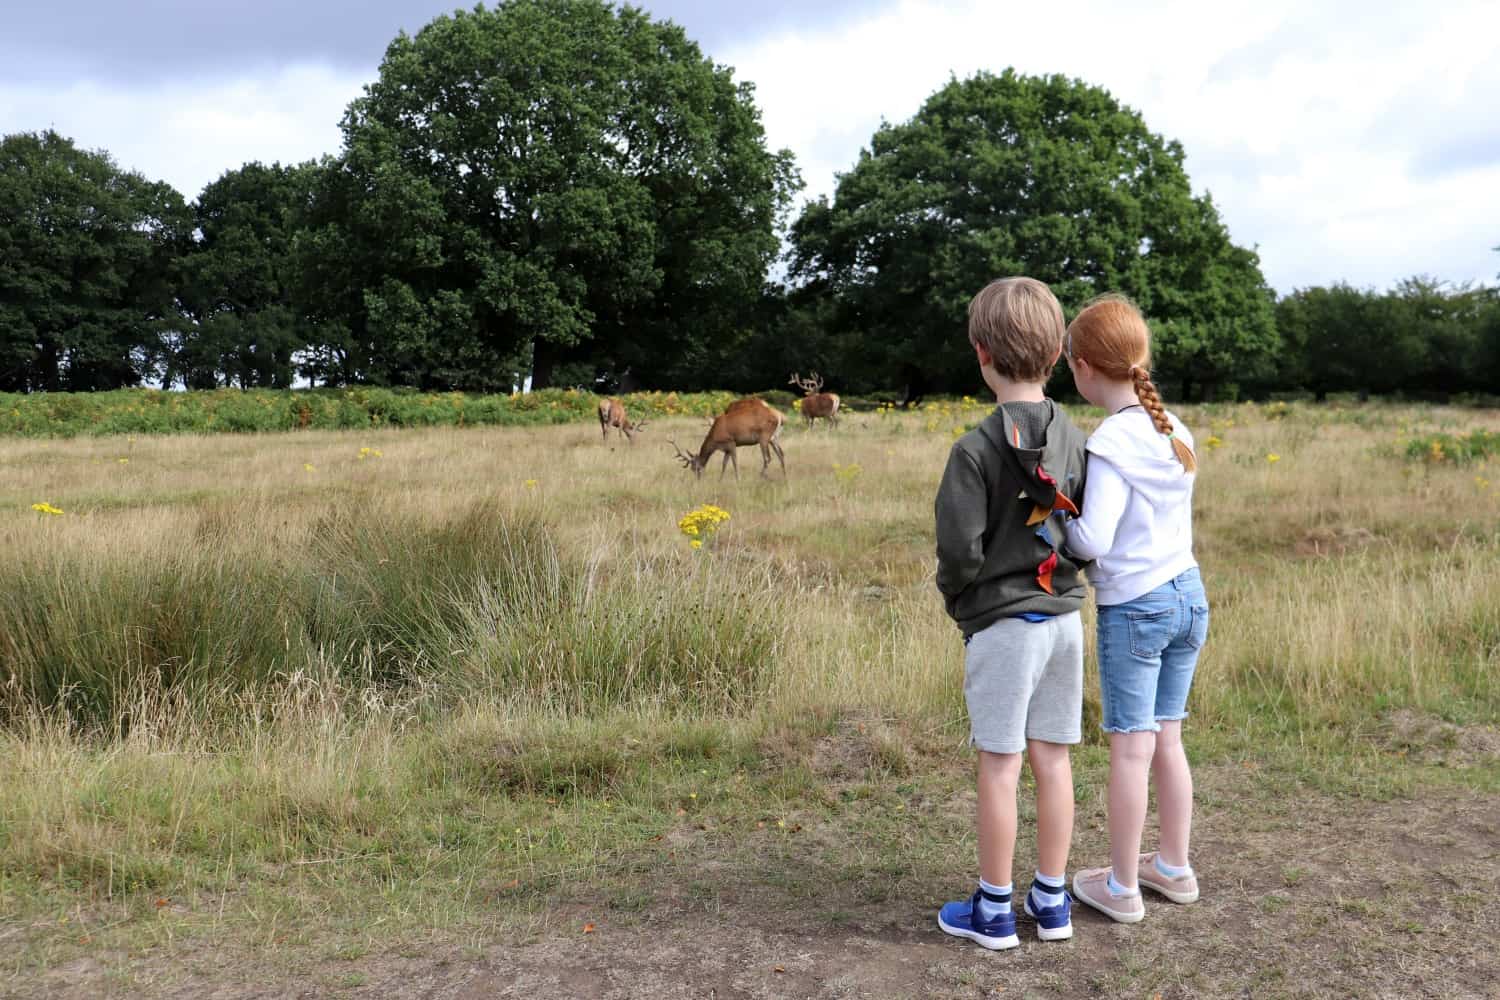 An Adventure to See Deer in Richmond Park, London